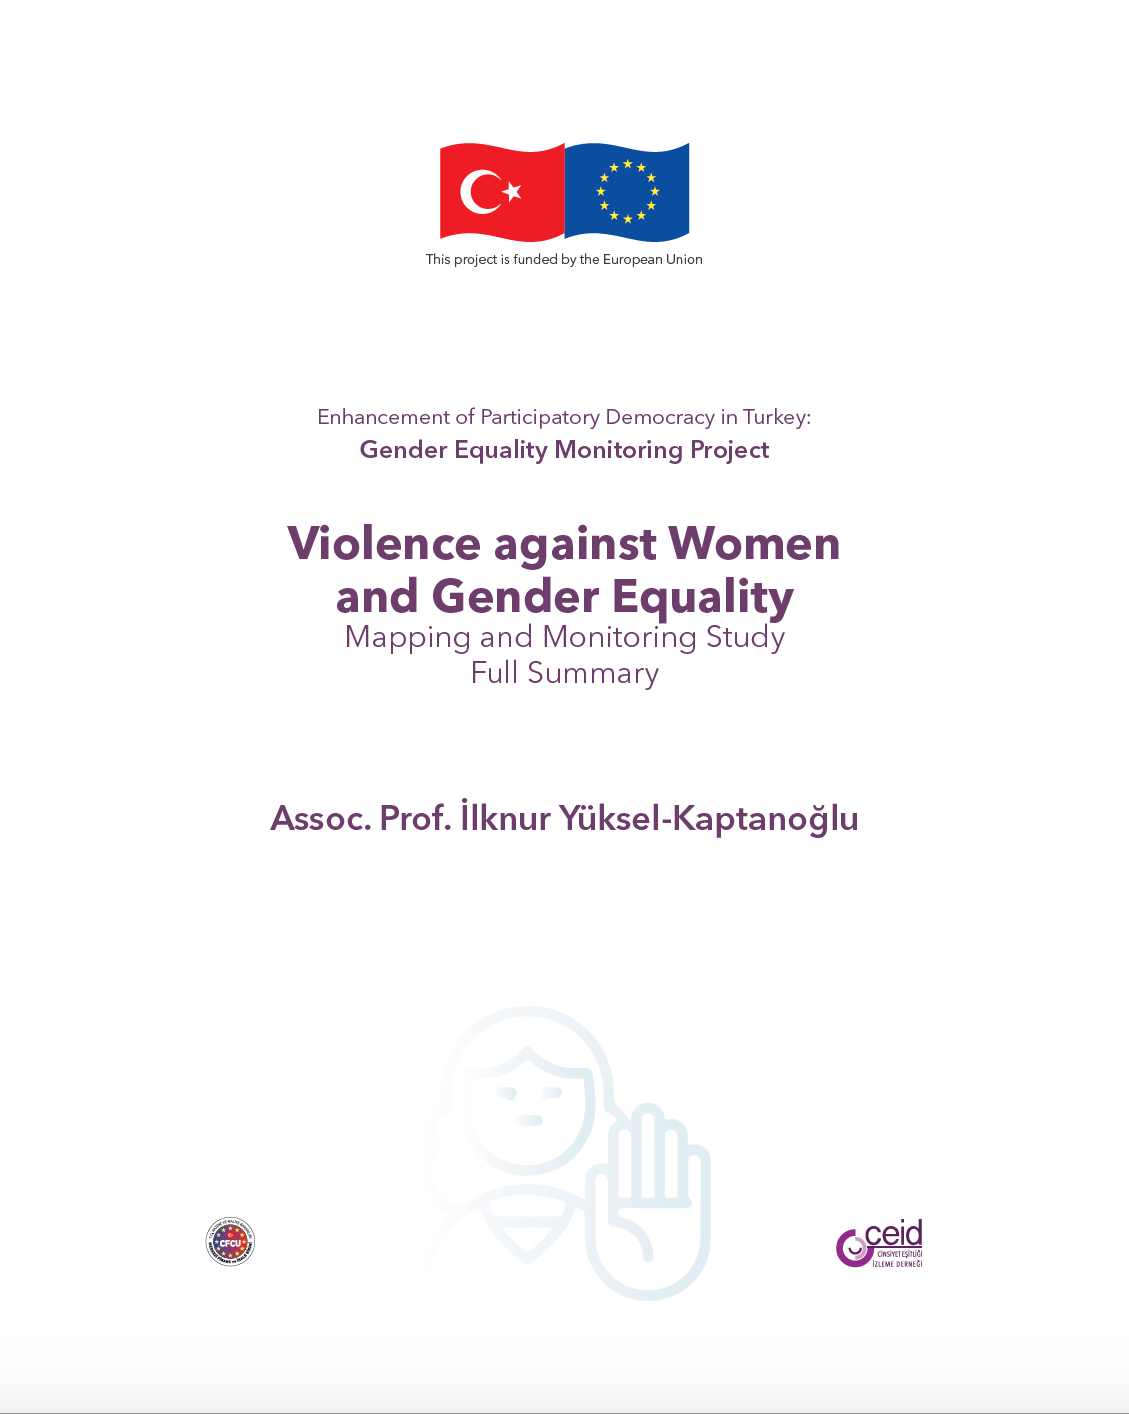 Violence against Women and Gender Equality